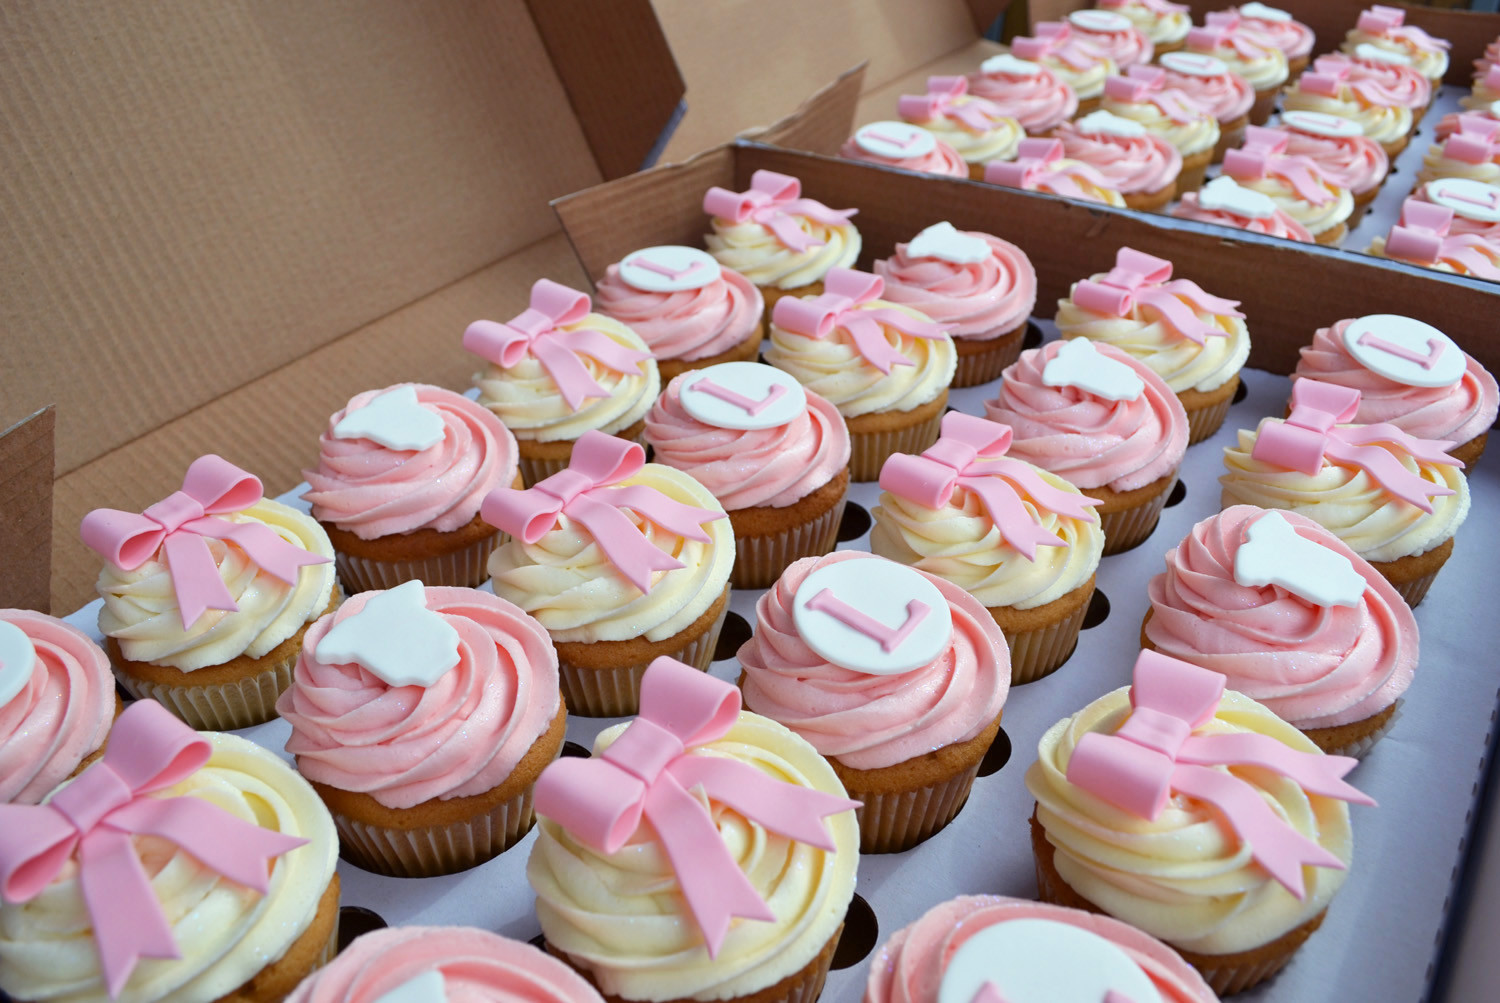 Our Most Shared Baby Shower Cupcakes for A Girl
 Ever